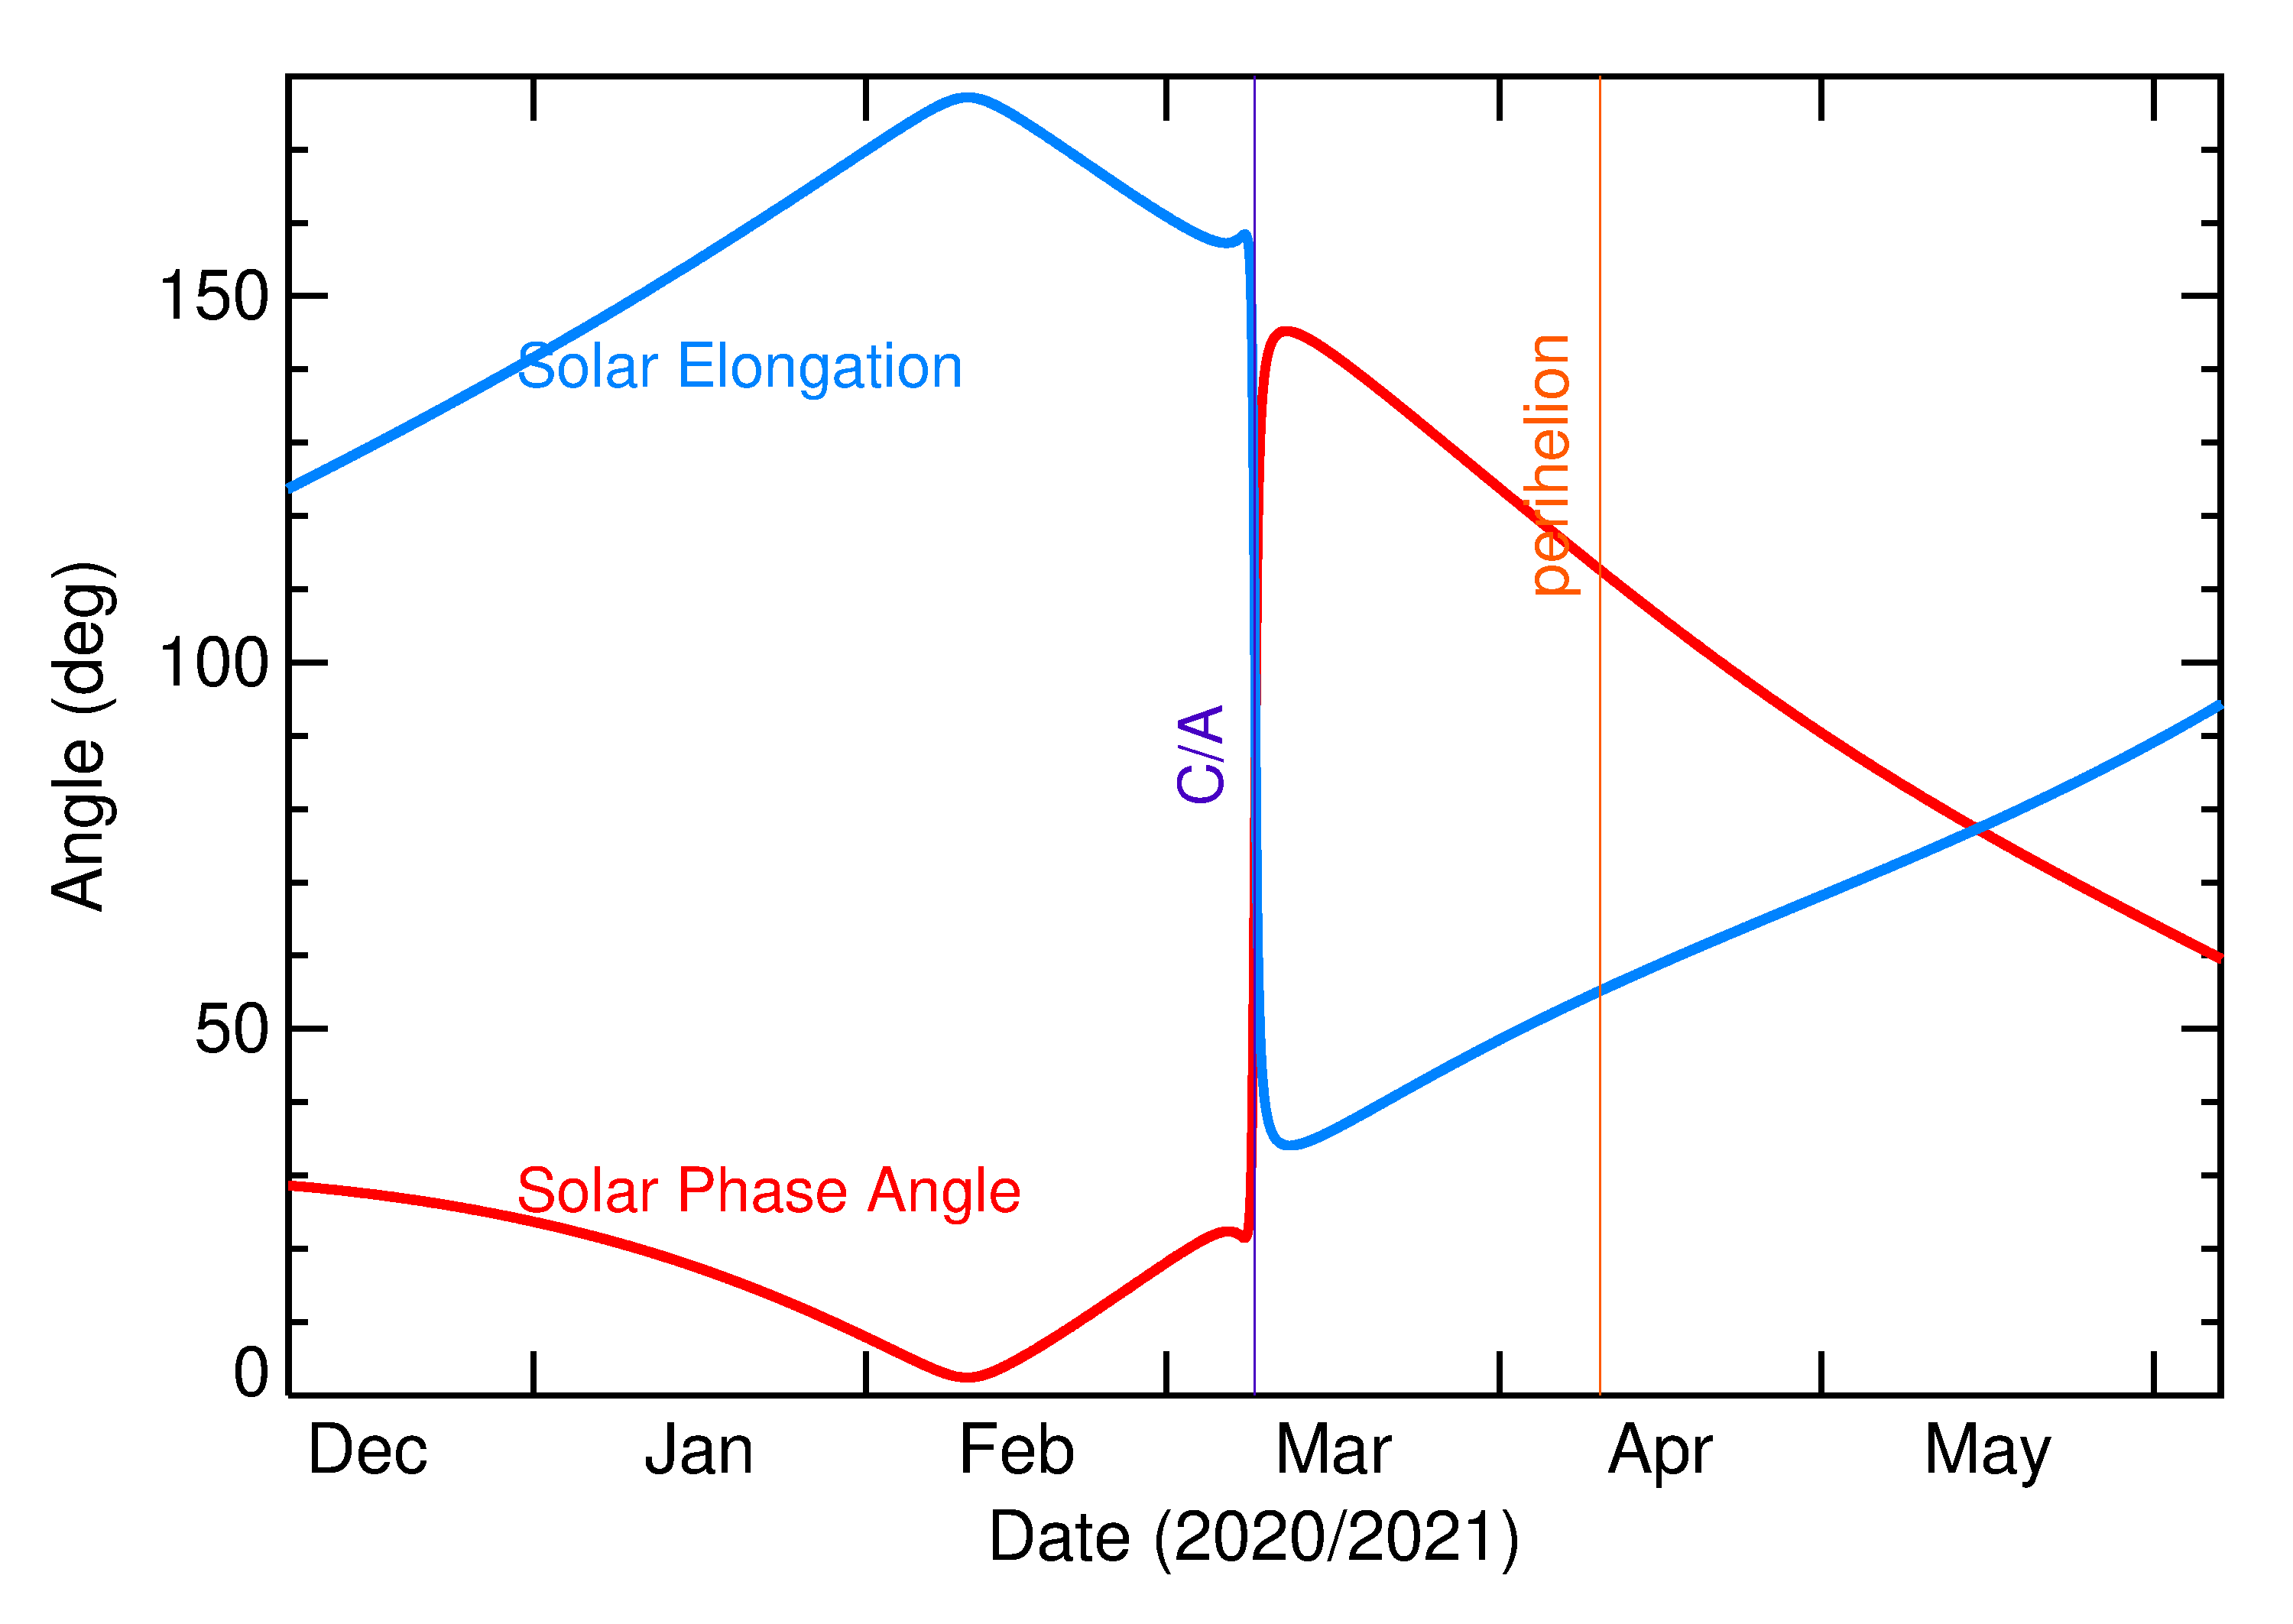 Solar Elongation and Solar Phase Angle of 2021 EF1 in the months around closest approach